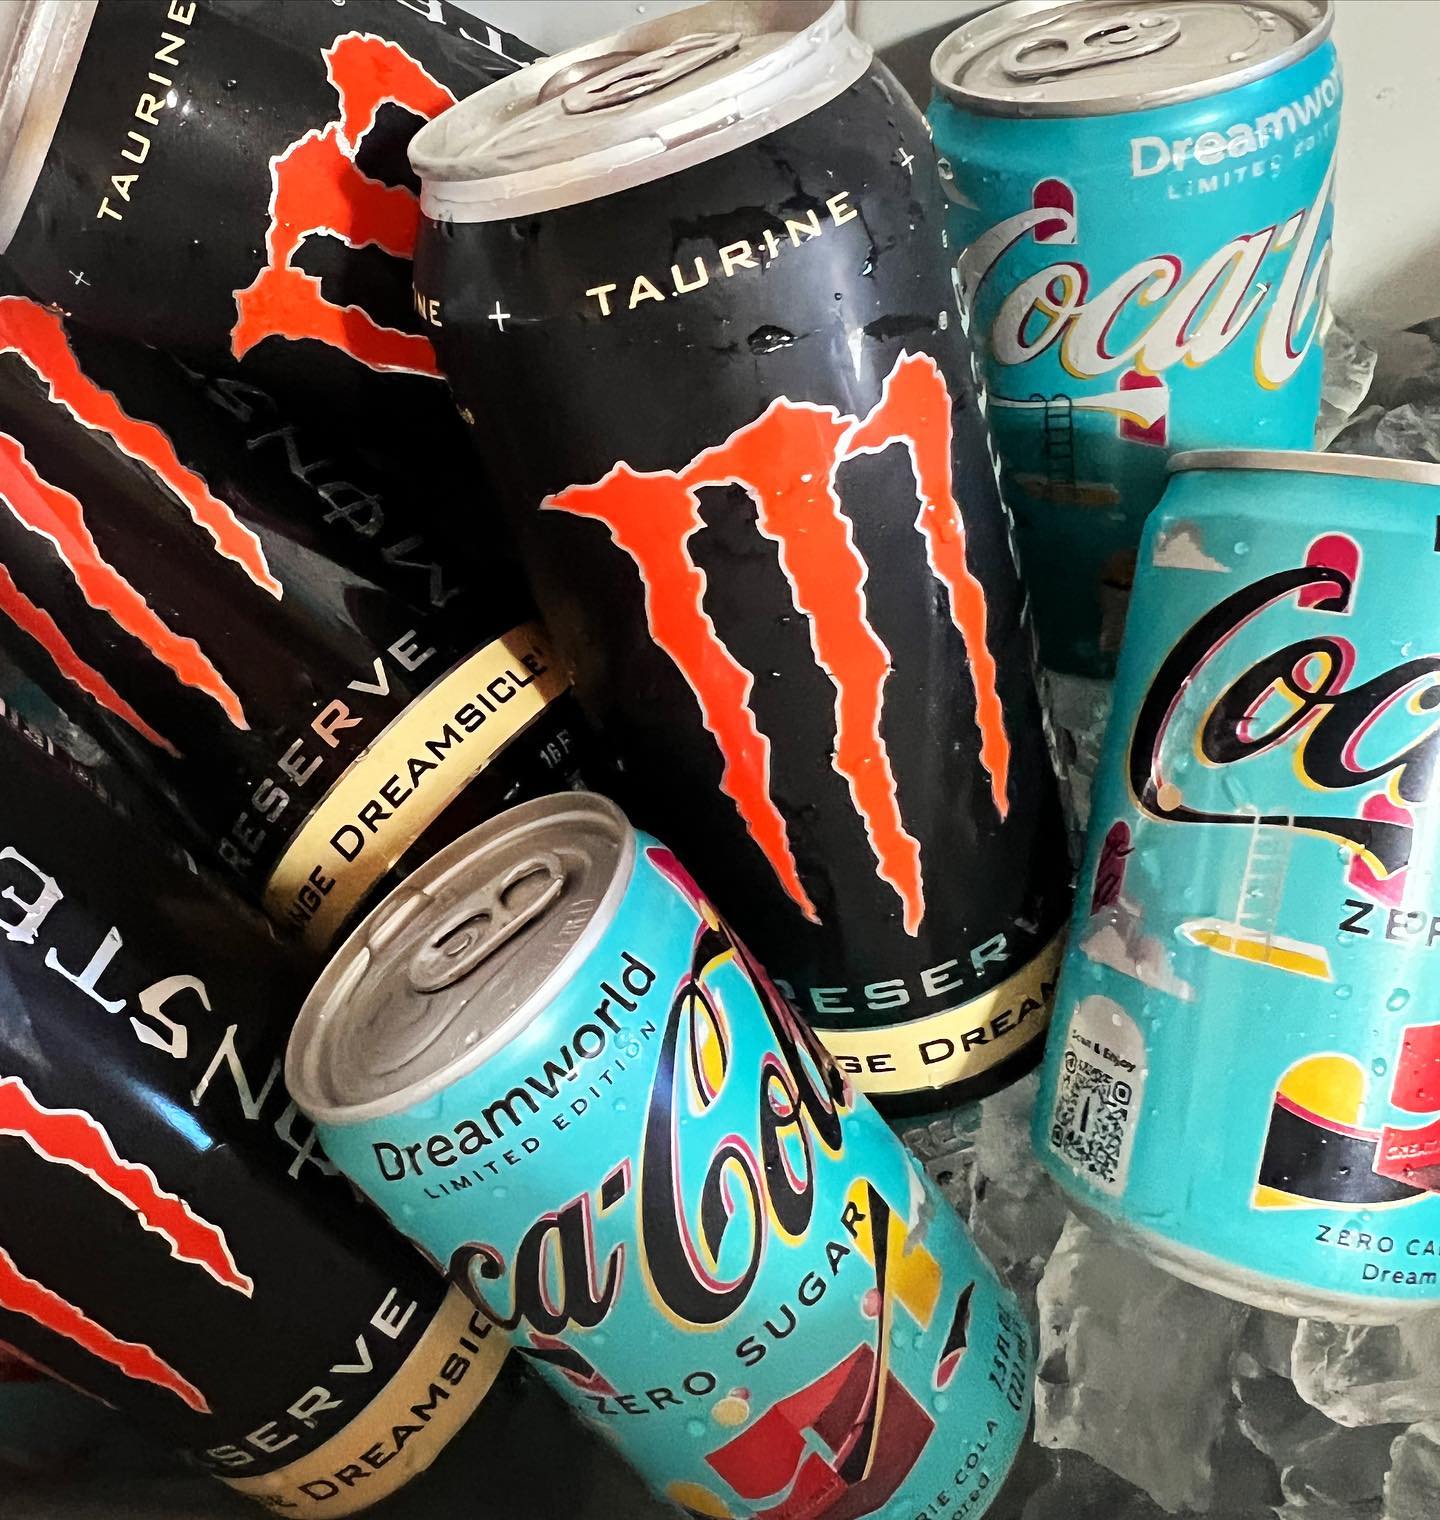 We tasted the future, thanks to @cocacola. 
🥤
Look for Coca-Cola Dreamworld and Monster Orange Dreamsicle to hit the shelves soon! (The latest @monsterenergy flavor won't be out for a few weeks, but it's worth the wait.)